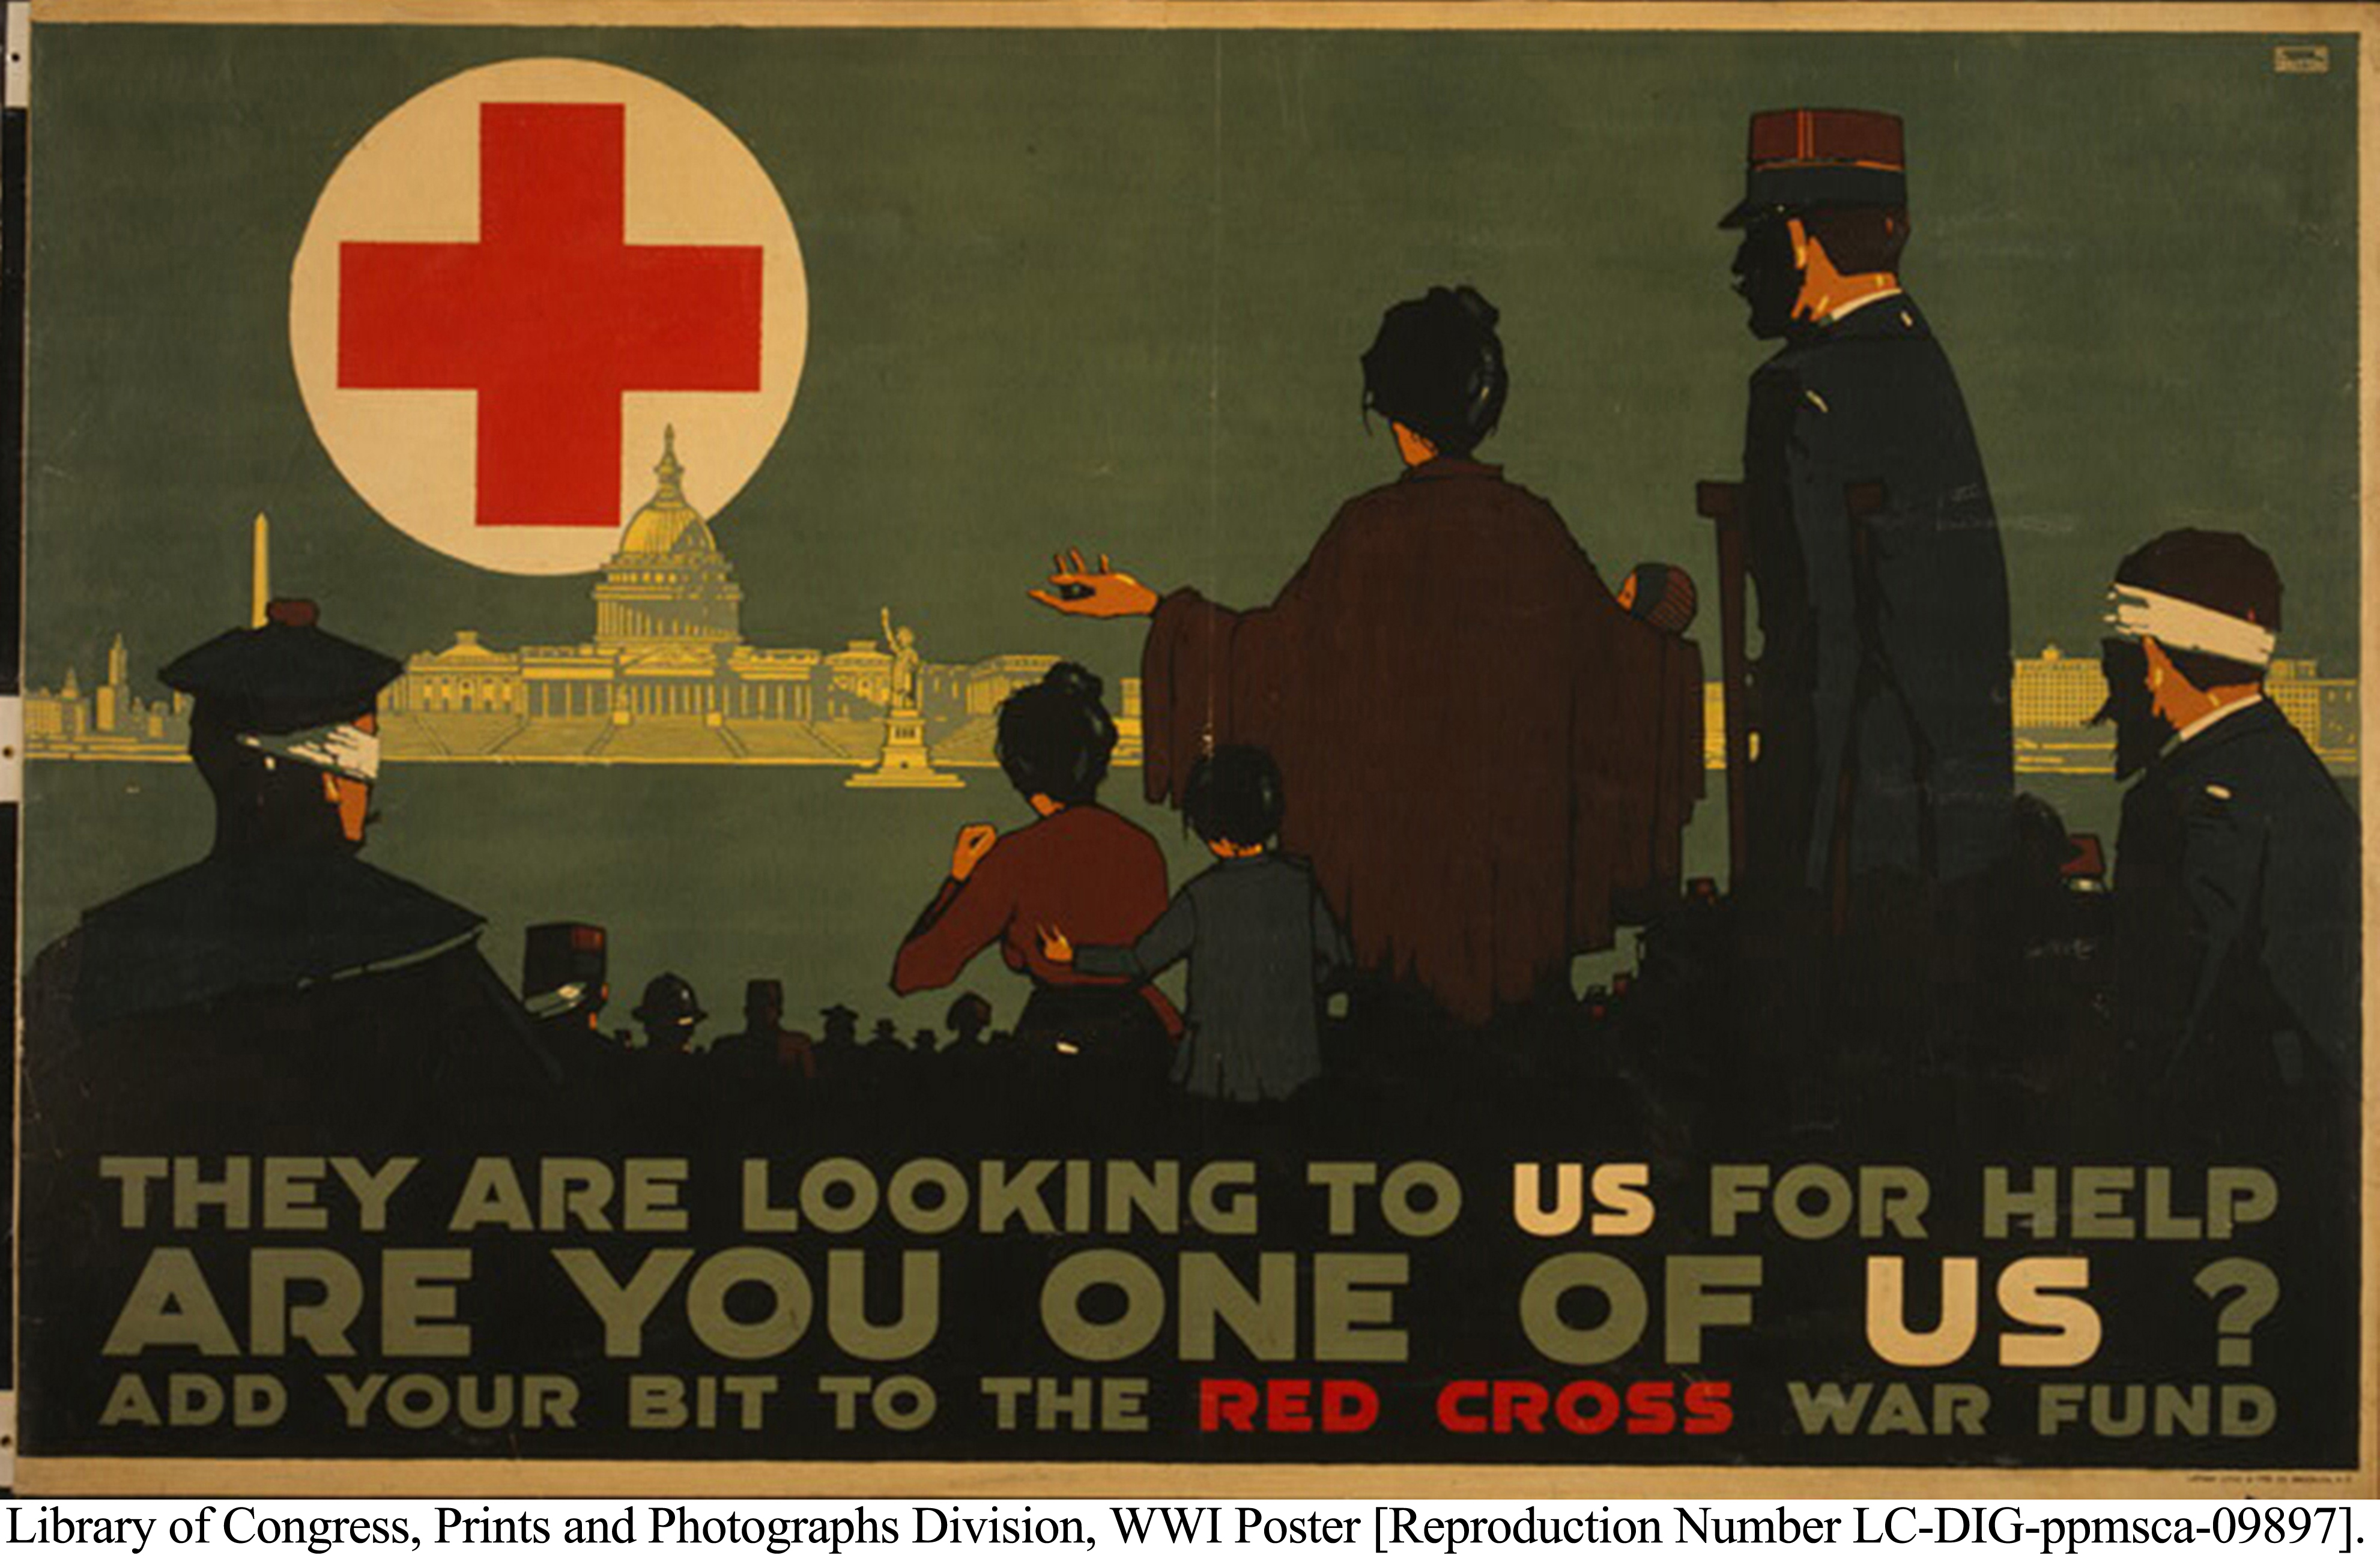 L. N. Britton, “They are Looking to US for Help,” 1917